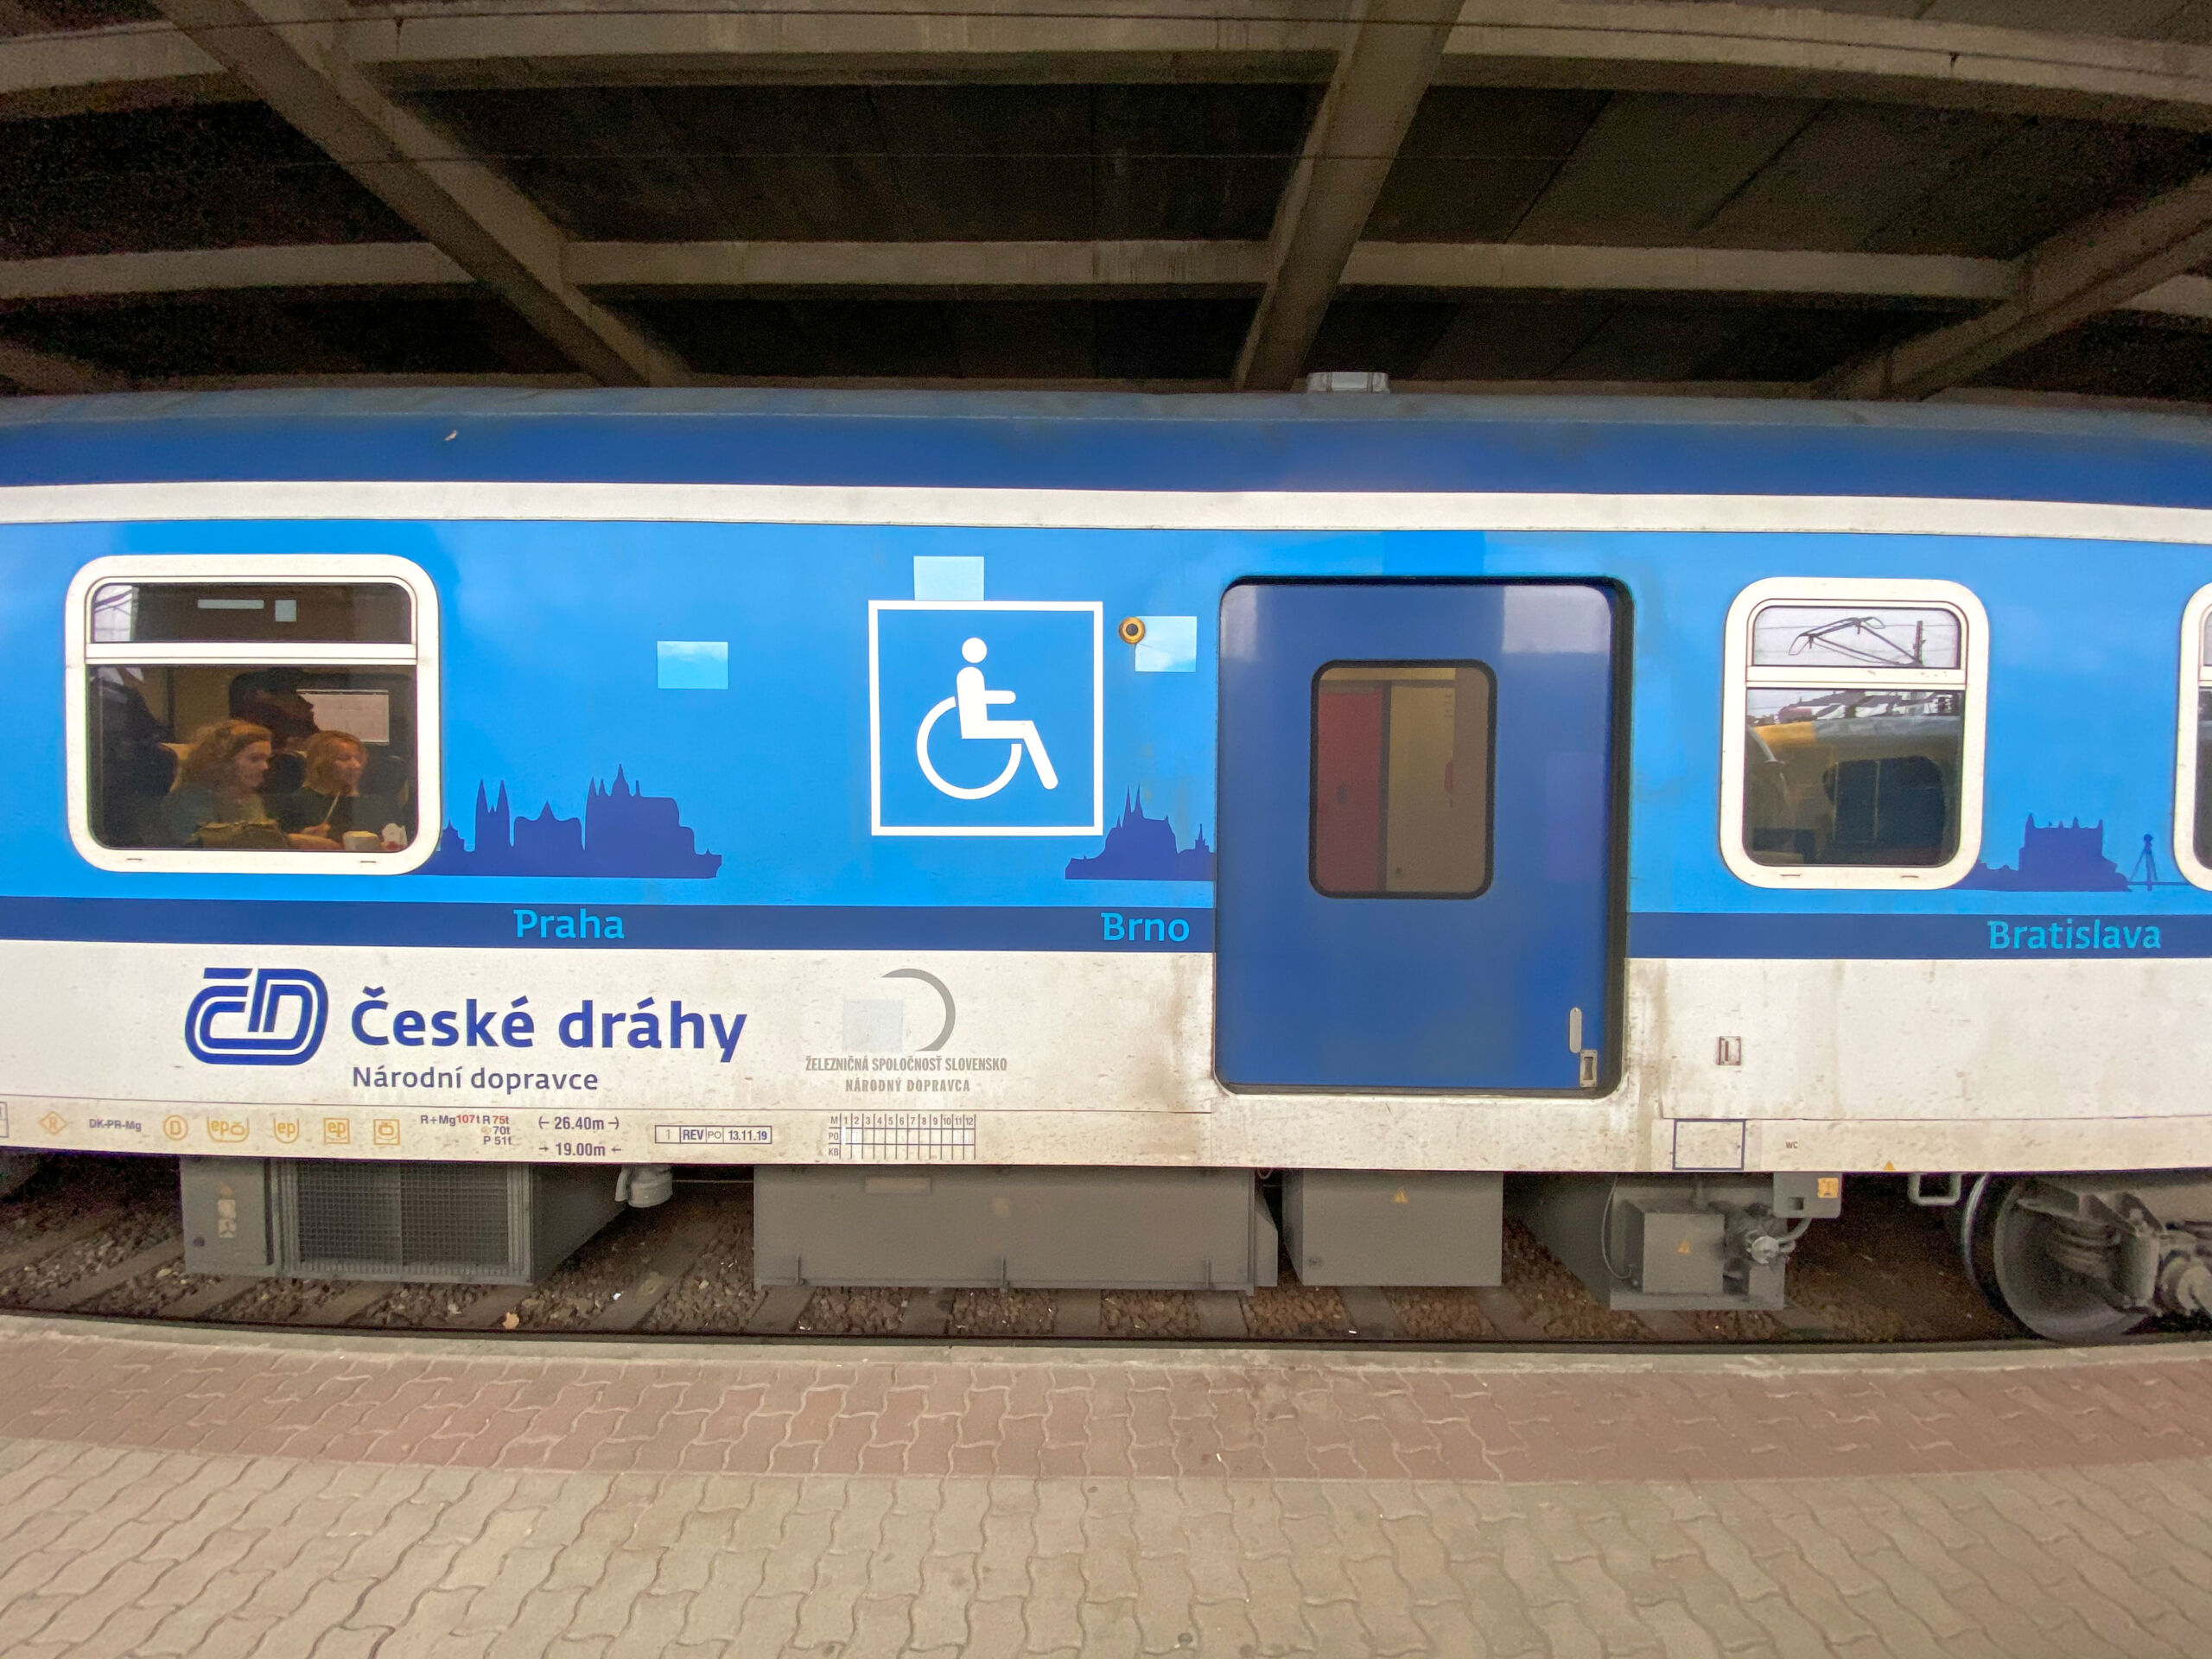 Entrance for the disabled on the train headed to Prague